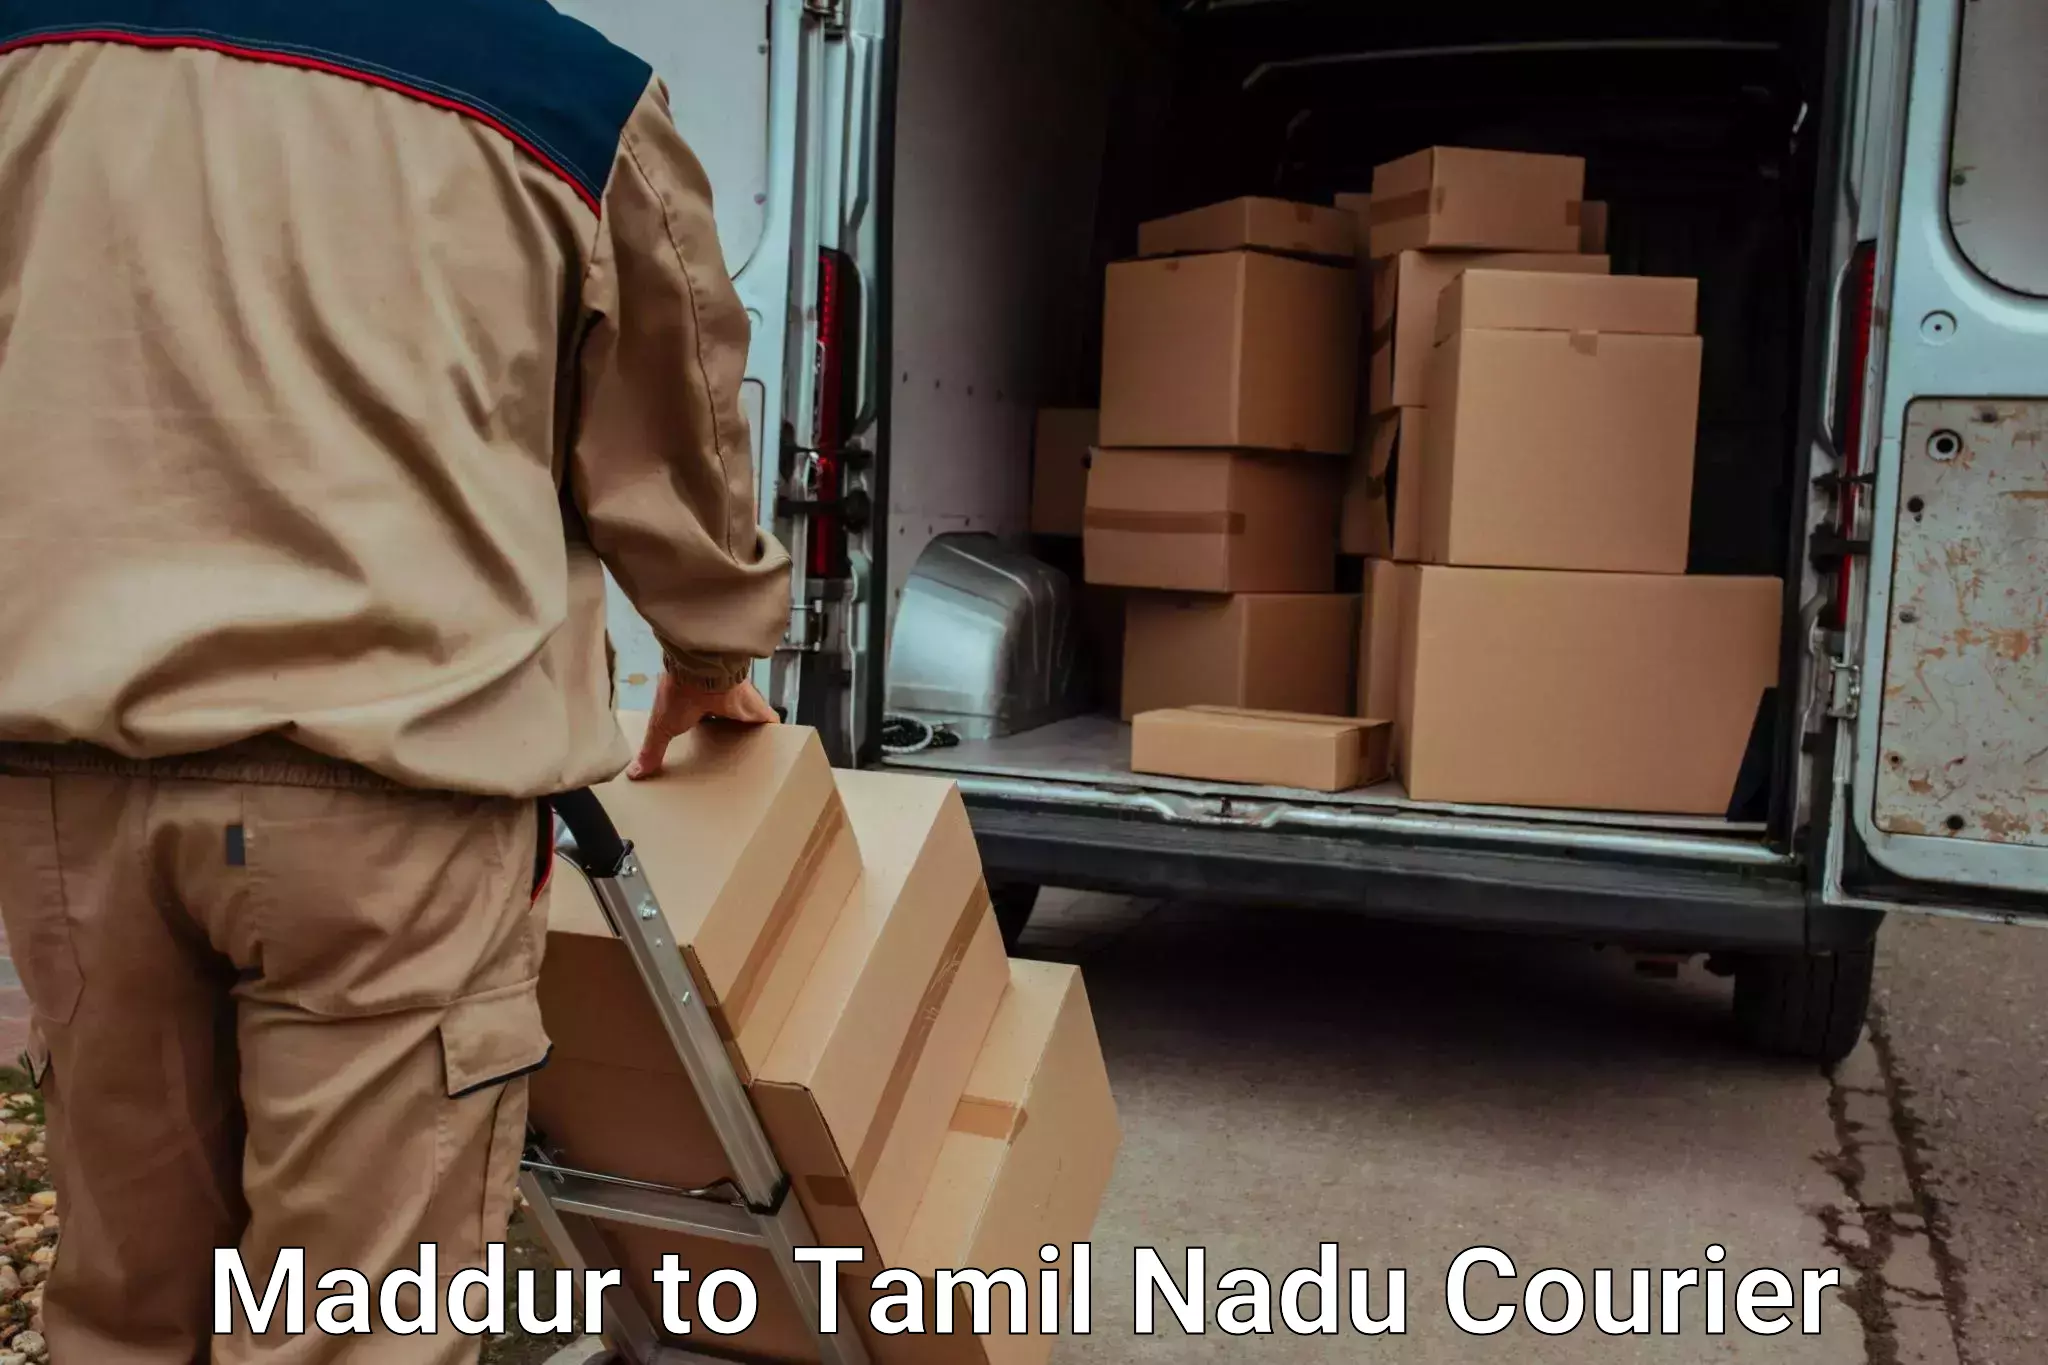 Trusted furniture movers in Maddur to Tuticorin Port